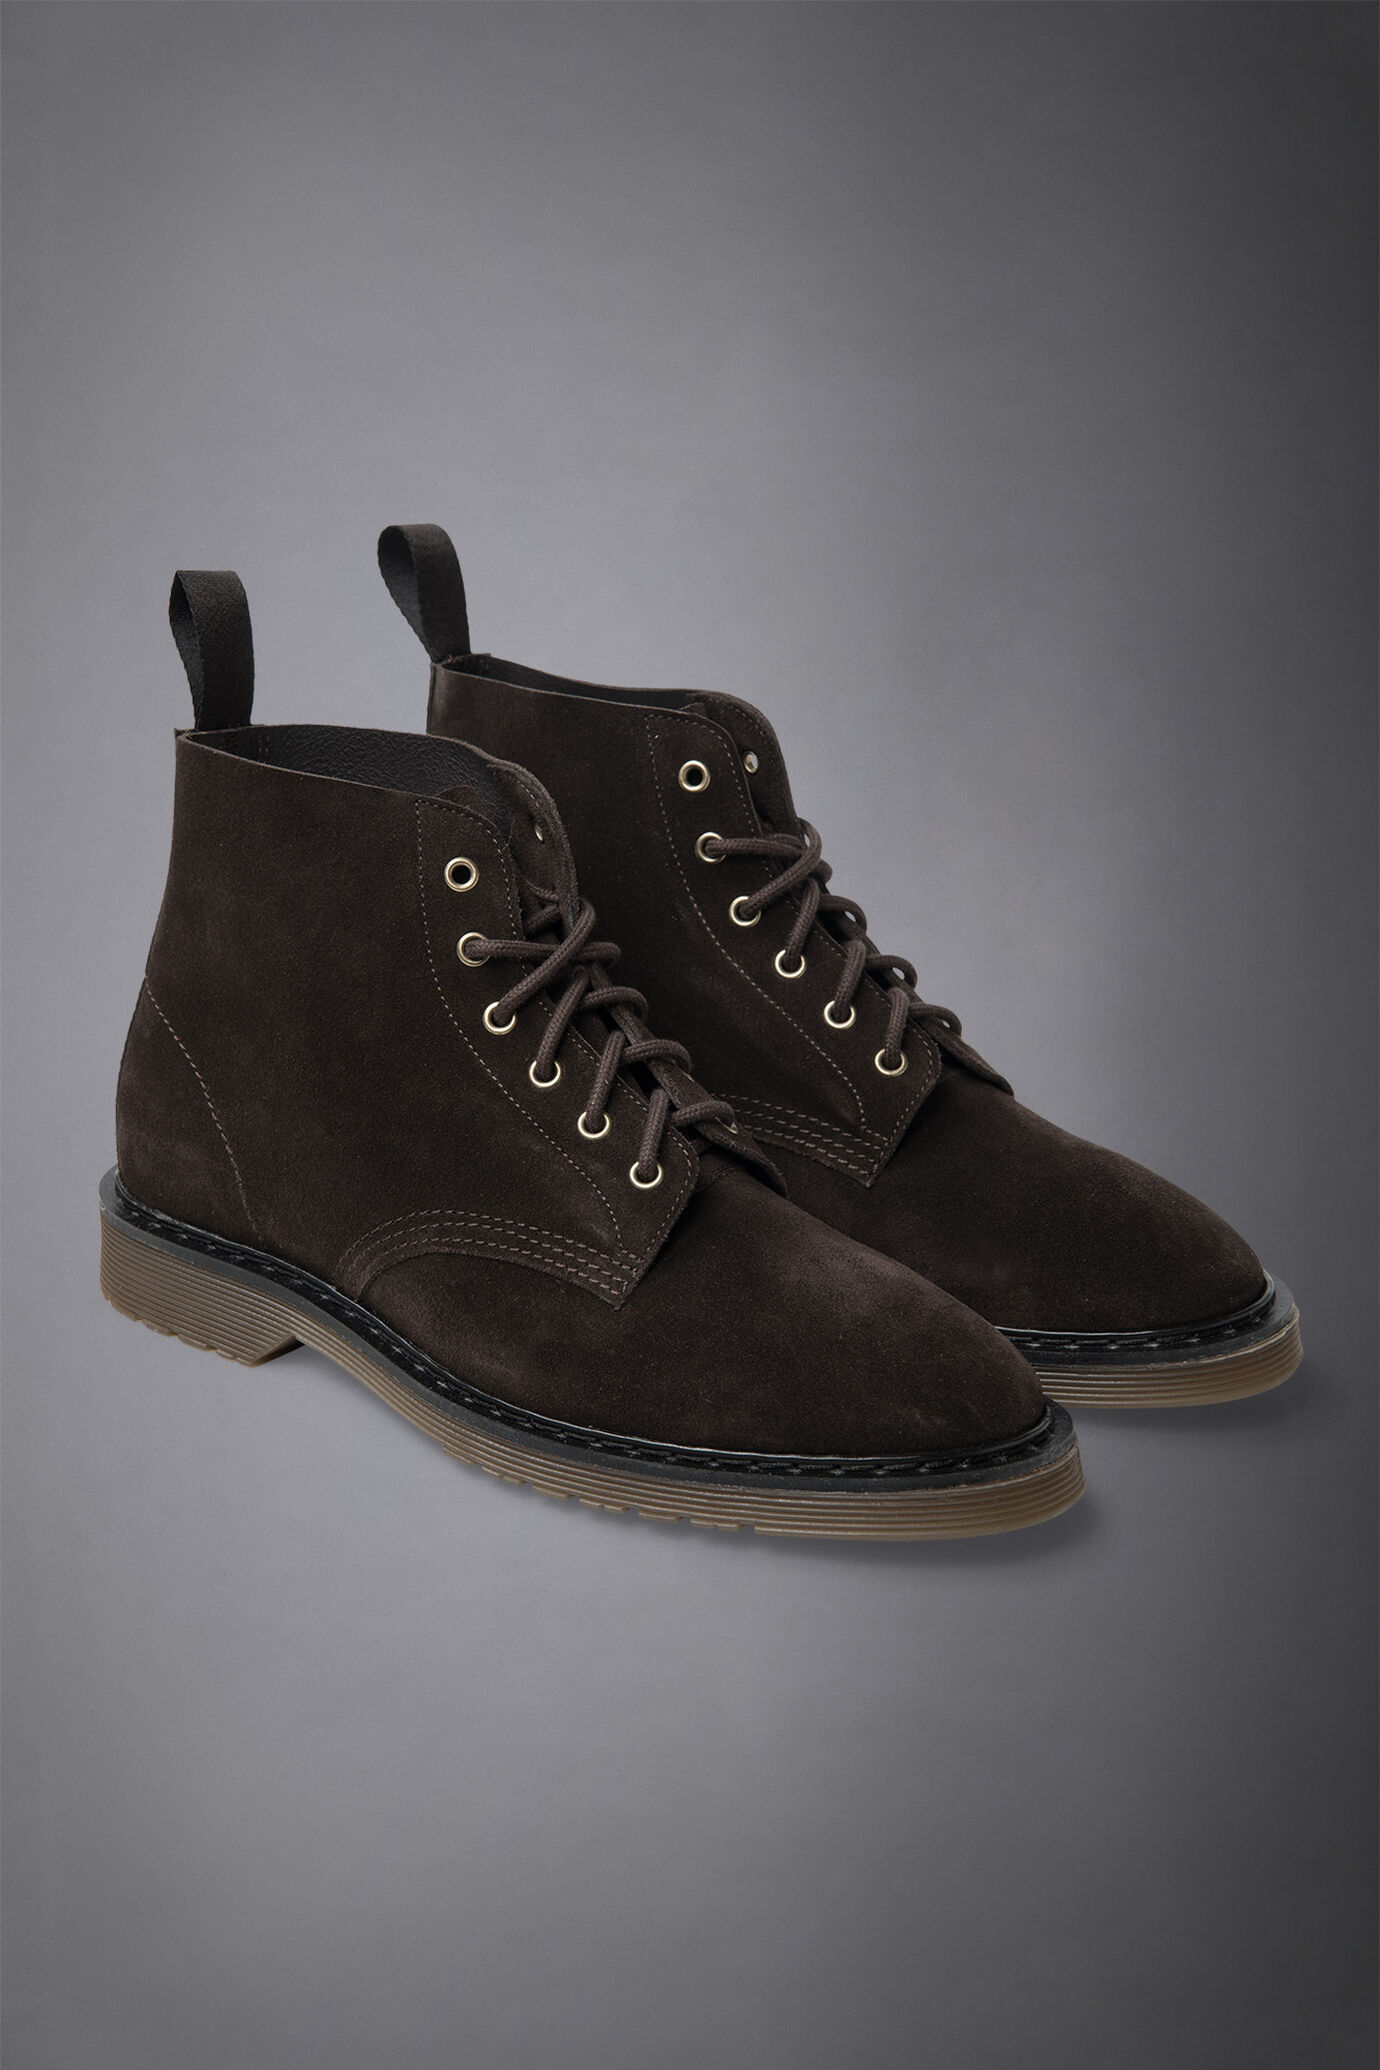 Men's 100% suede boots with rubber lug sole